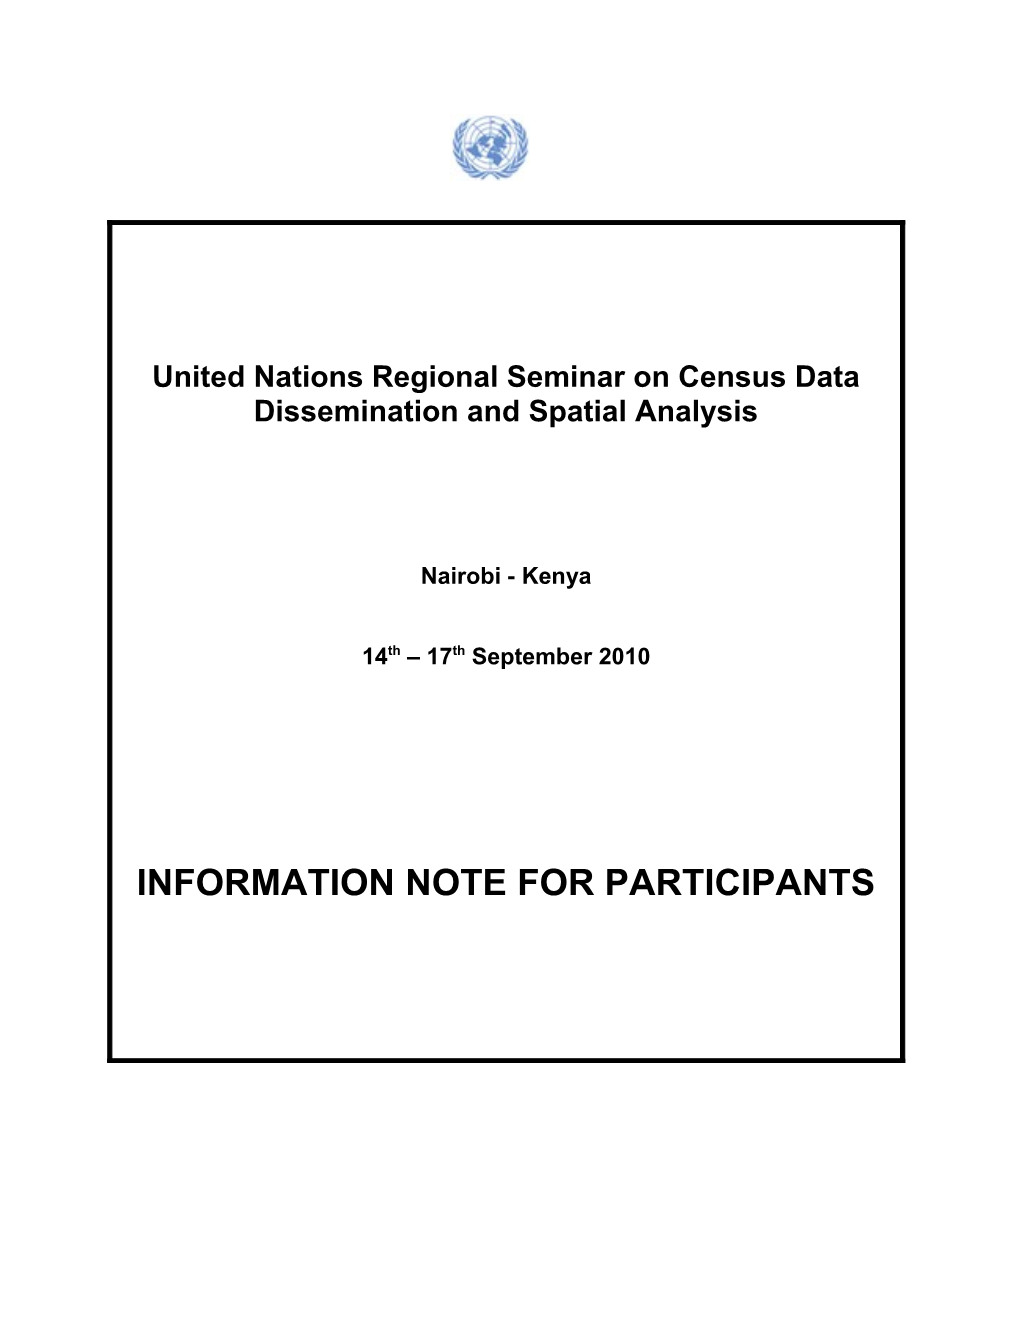 United Nations Statistics Division (Unsd)